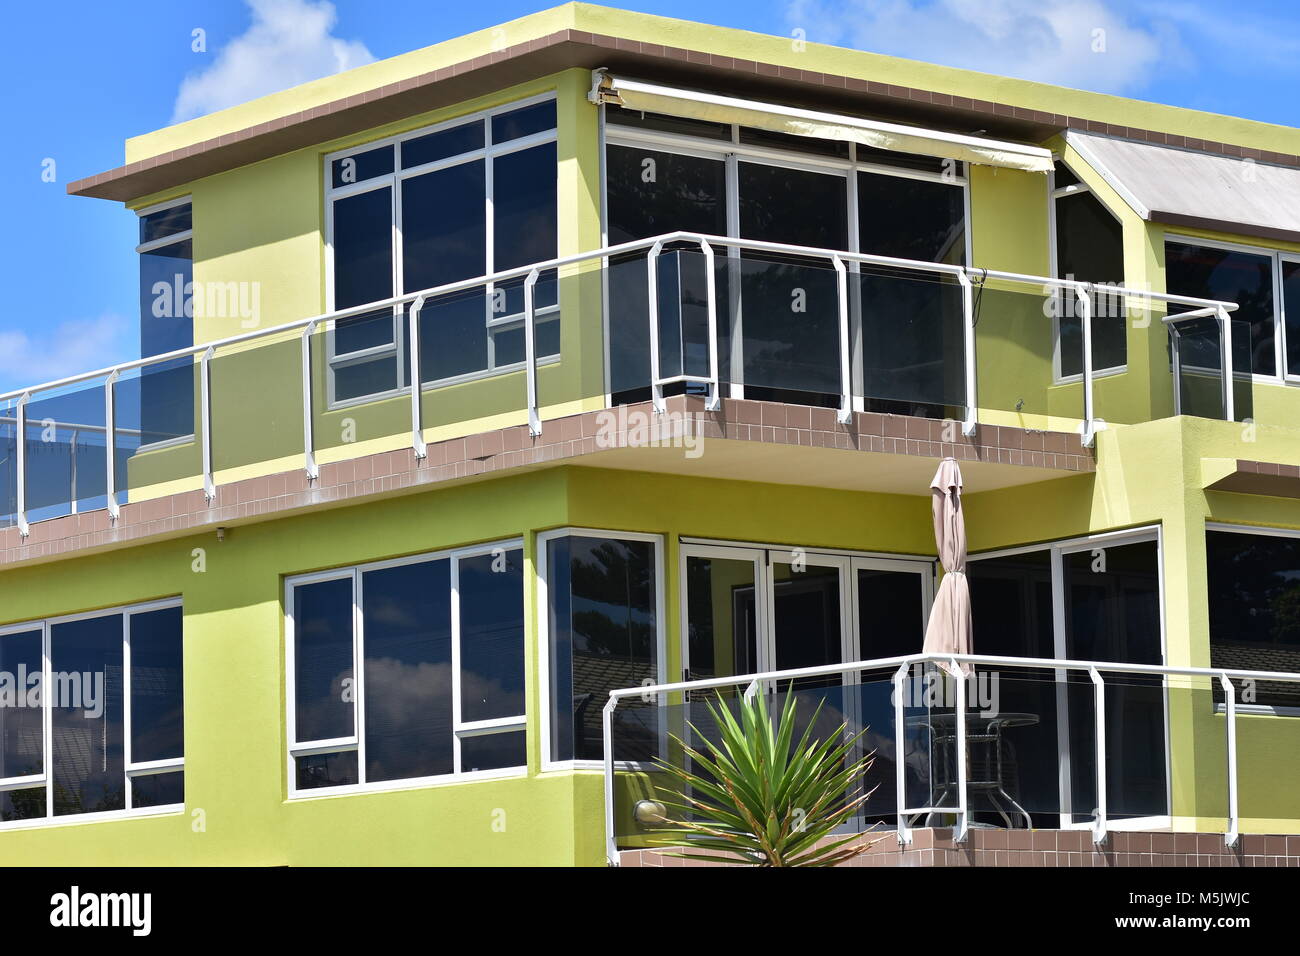 Yellow multi-story holiday house with verandas protected by glass railing and tinted glass windows. Stock Photo